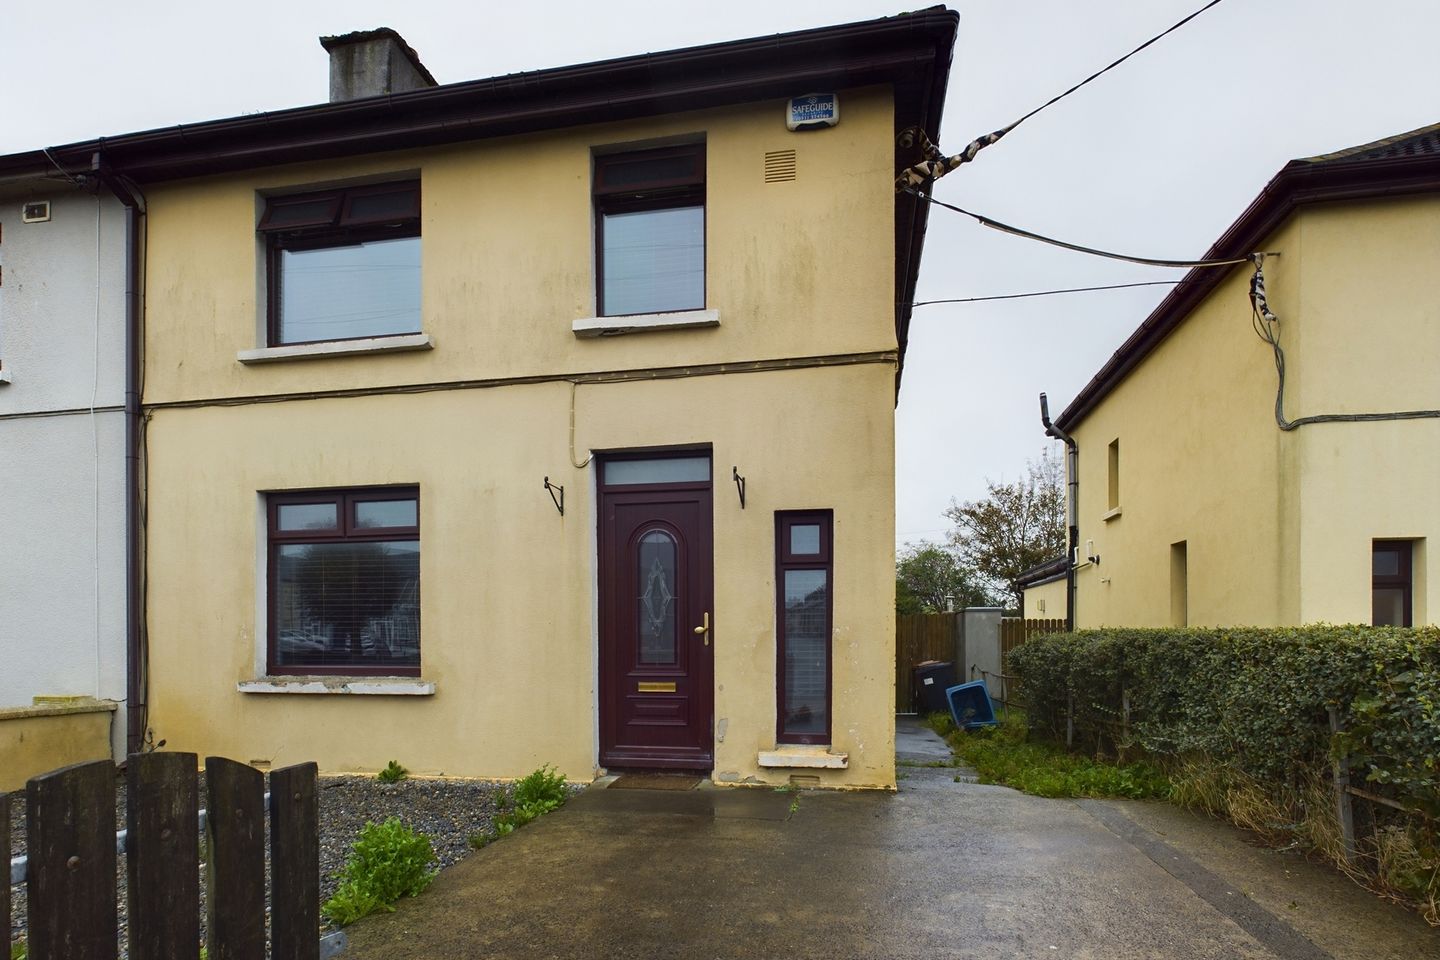 9 The Terrace, Barrack Street, Waterford City, Co. Waterford, X91AHY9